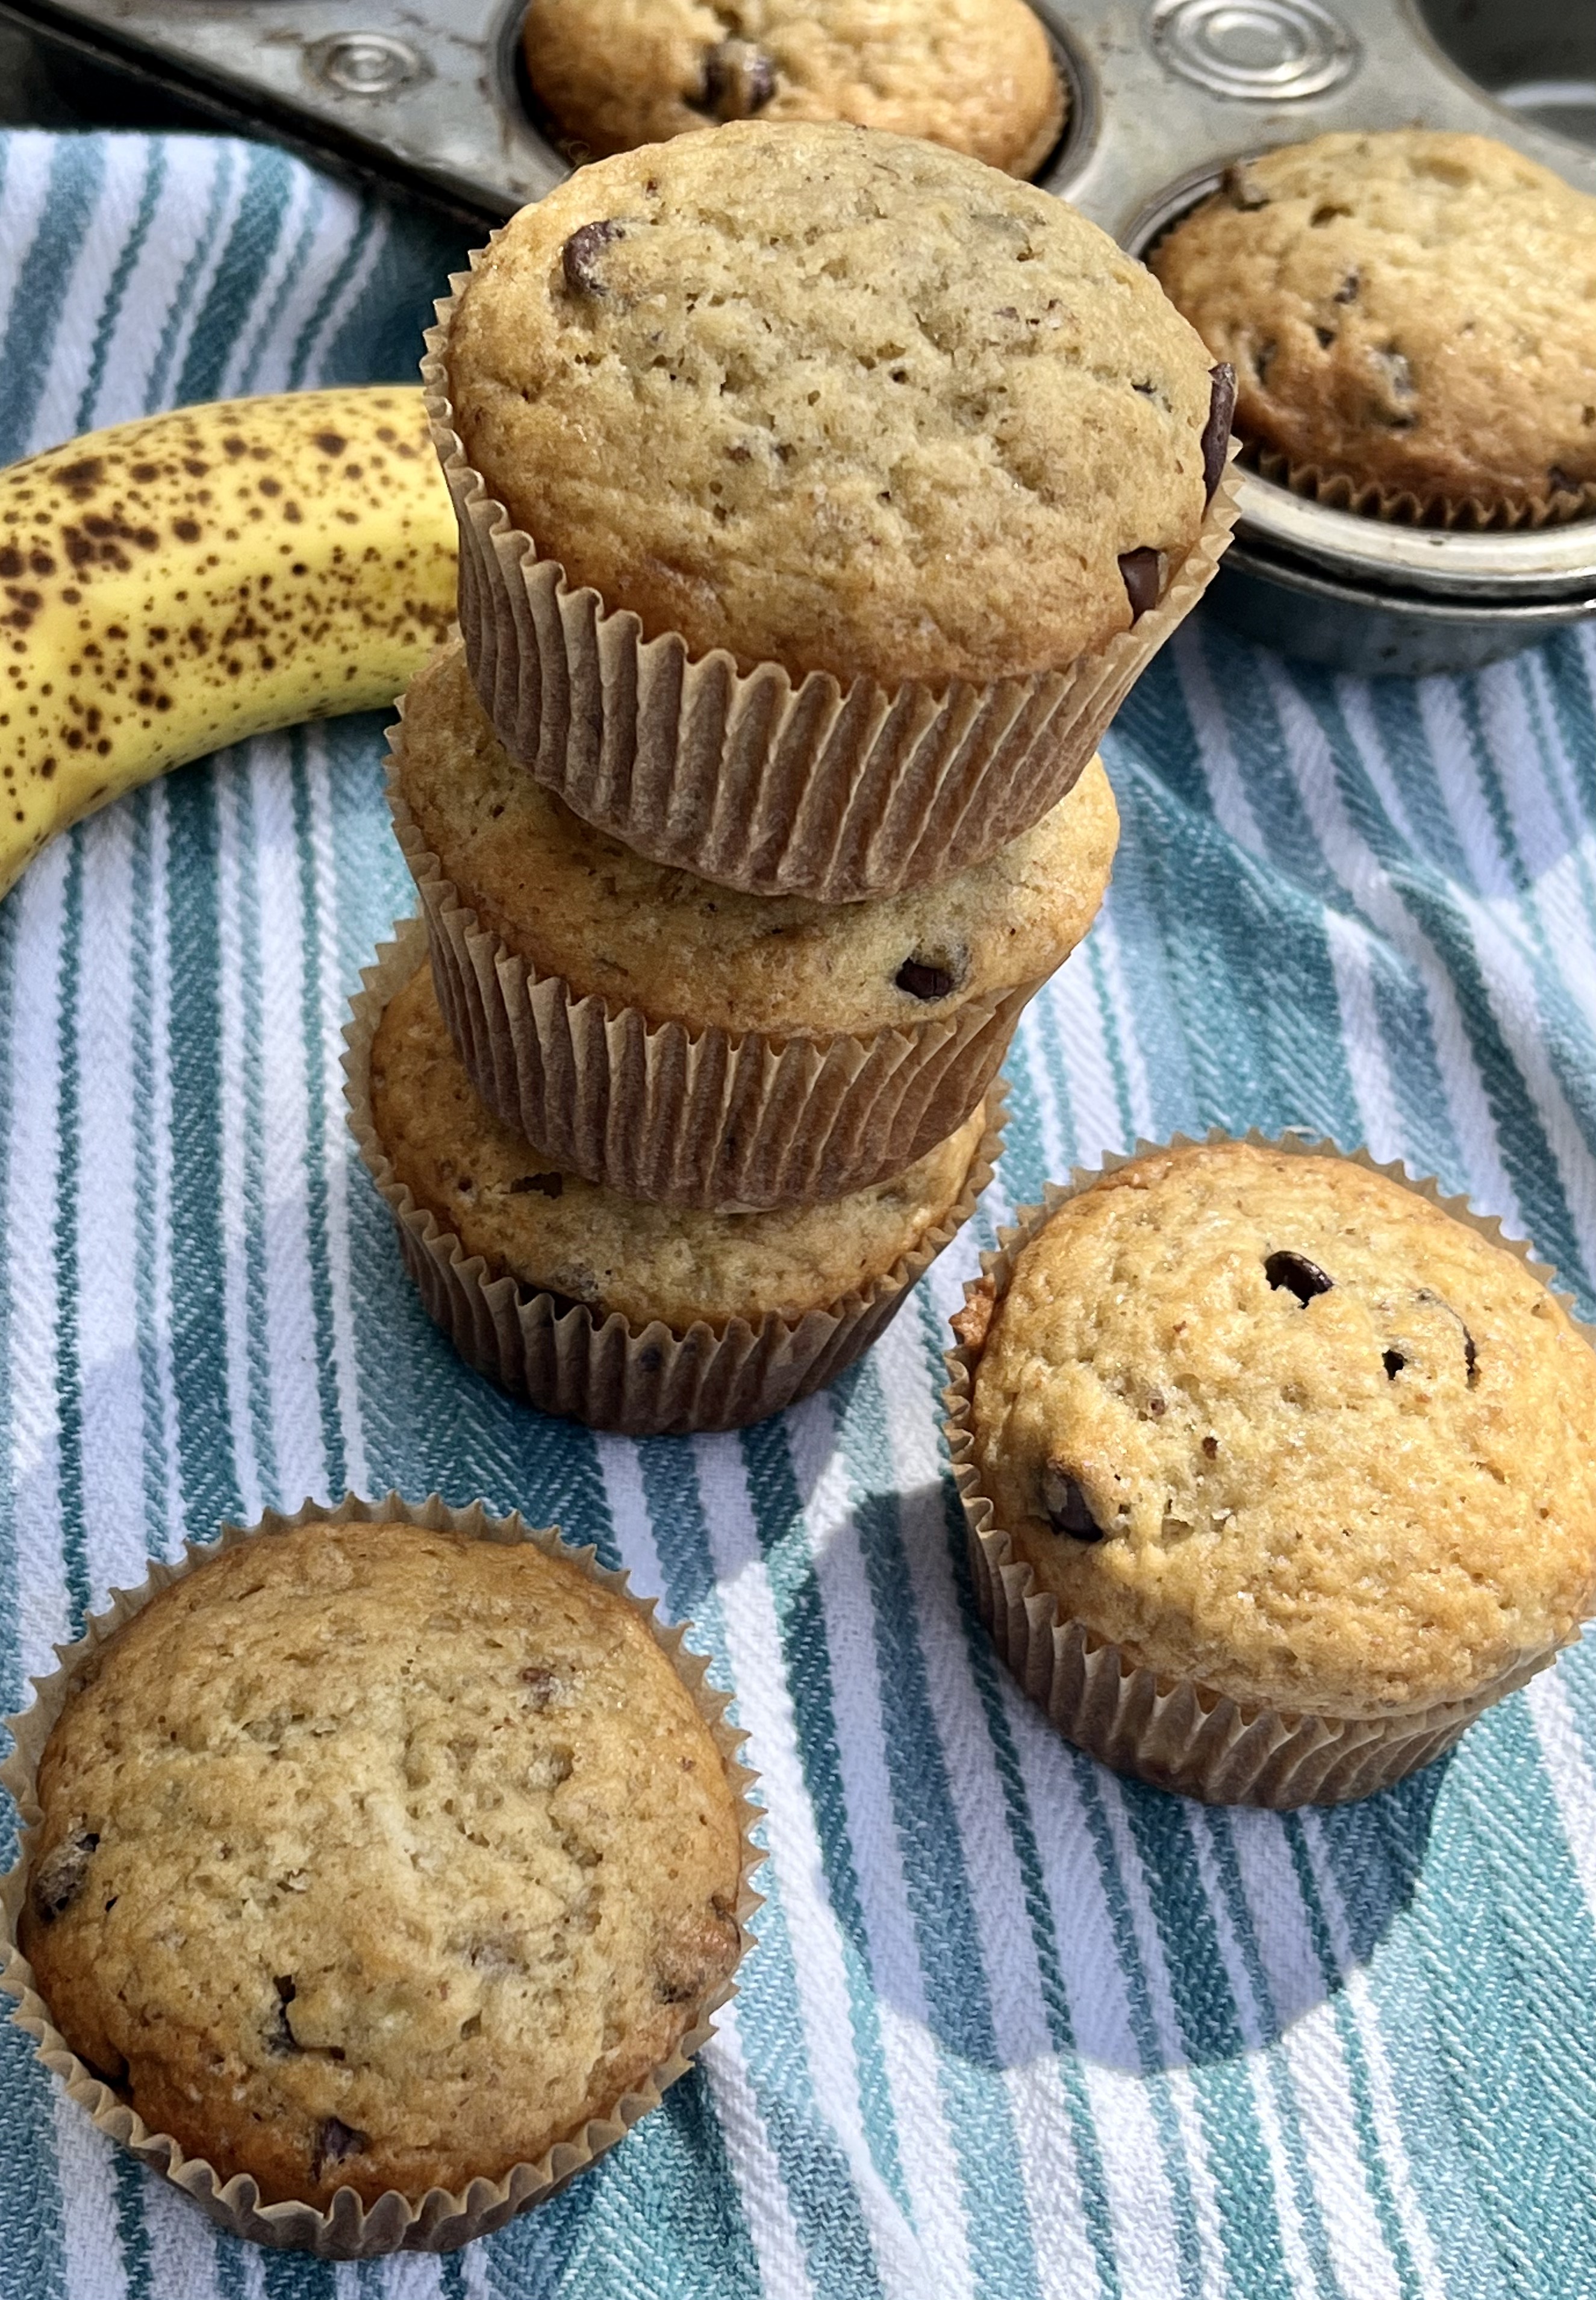 Banana Chocolate Chip Muffins - Simply Scrumptious by Sarah